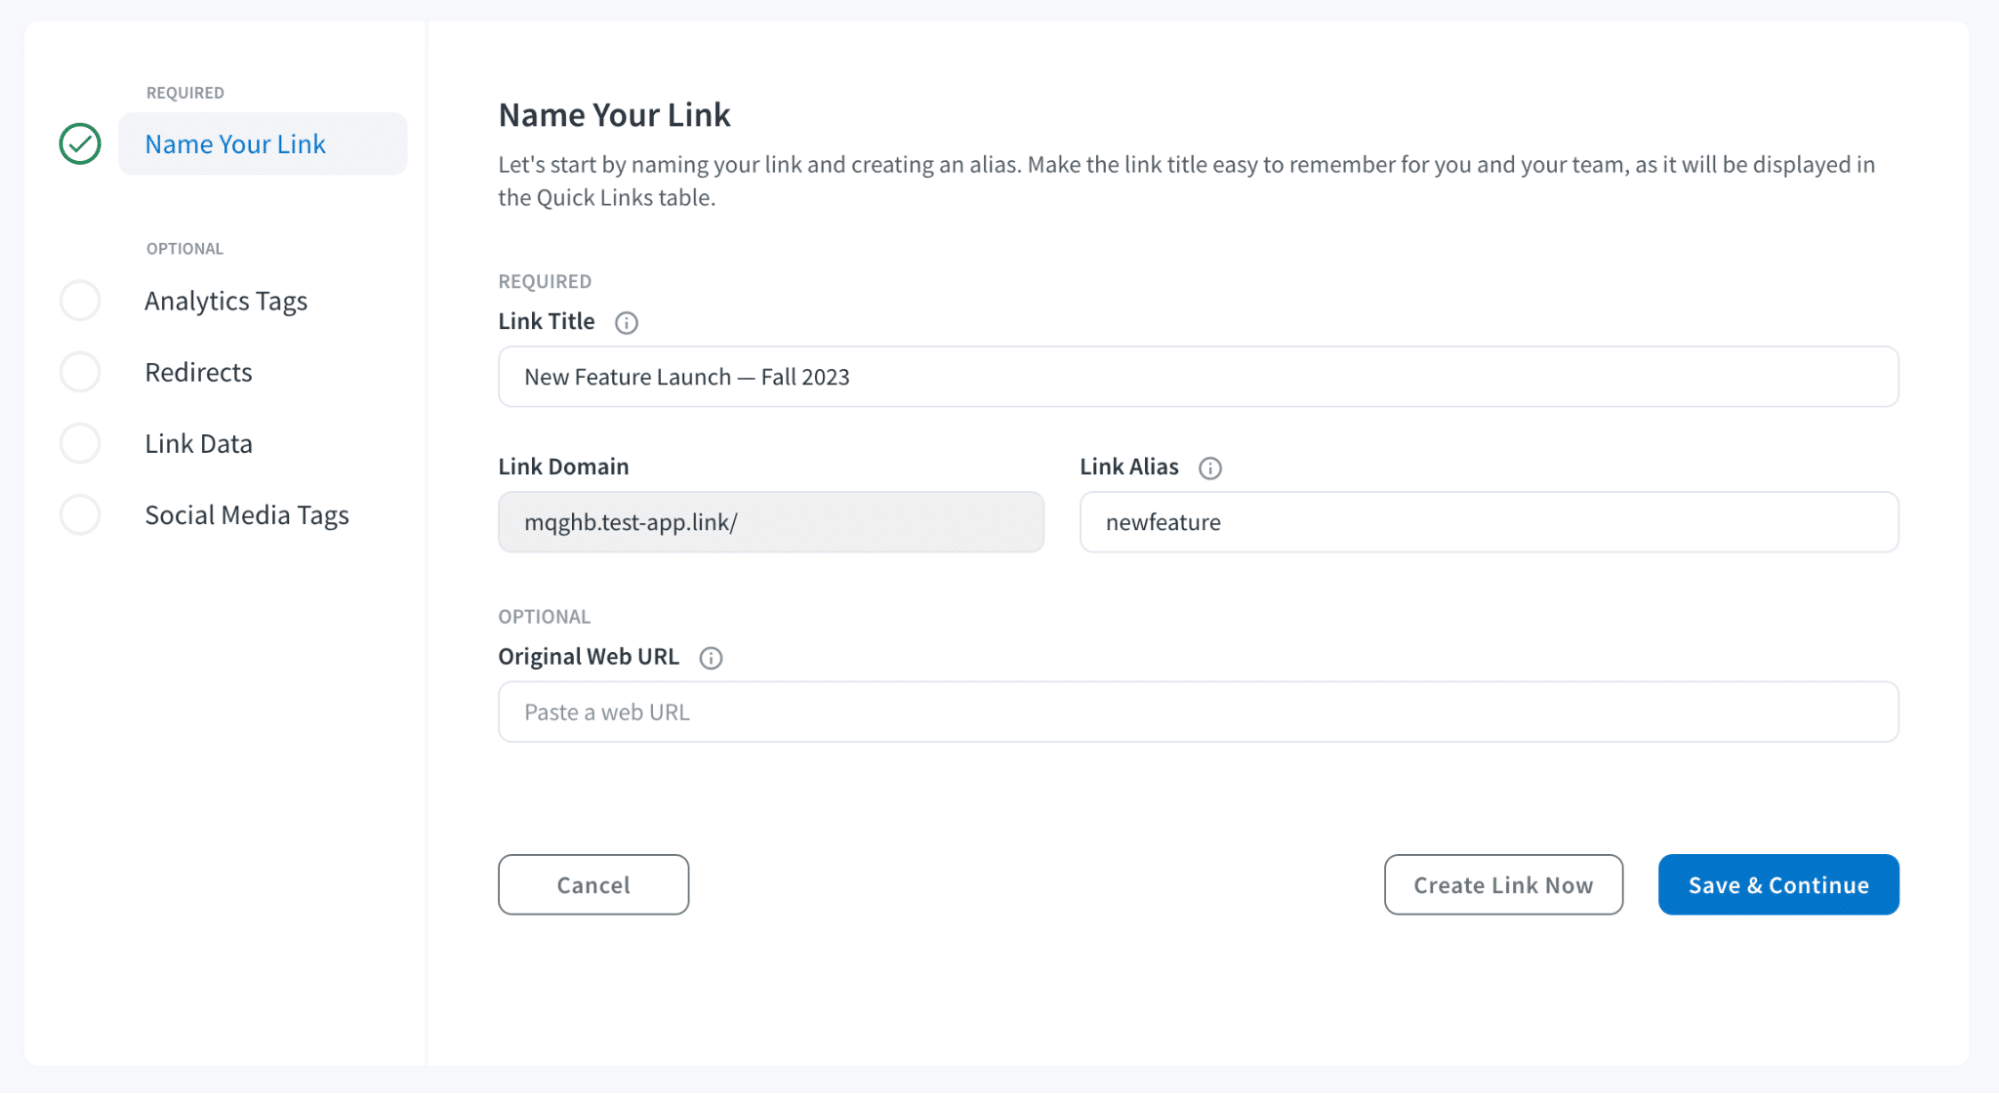 Screenshot of a Branch Dashboard showing how to create a Quick Link: "Name Your Link Let's start by naming your link and creating an alias. Make the title easy to remember for you and your team, as it will be displayed in the Quick Links Table." 